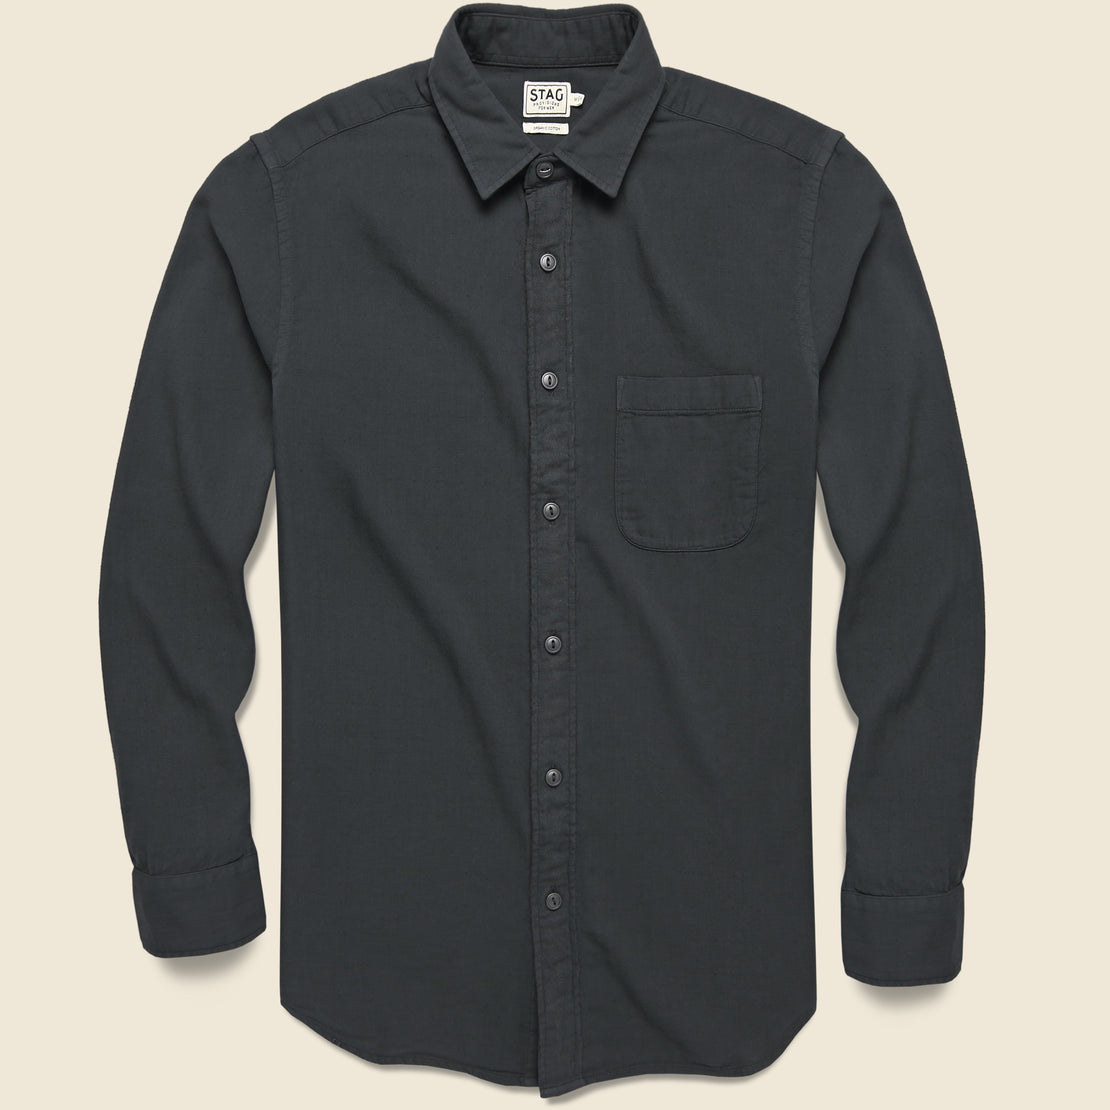 STAG Garment-Dyed Double Cloth Shirt - Washed Black